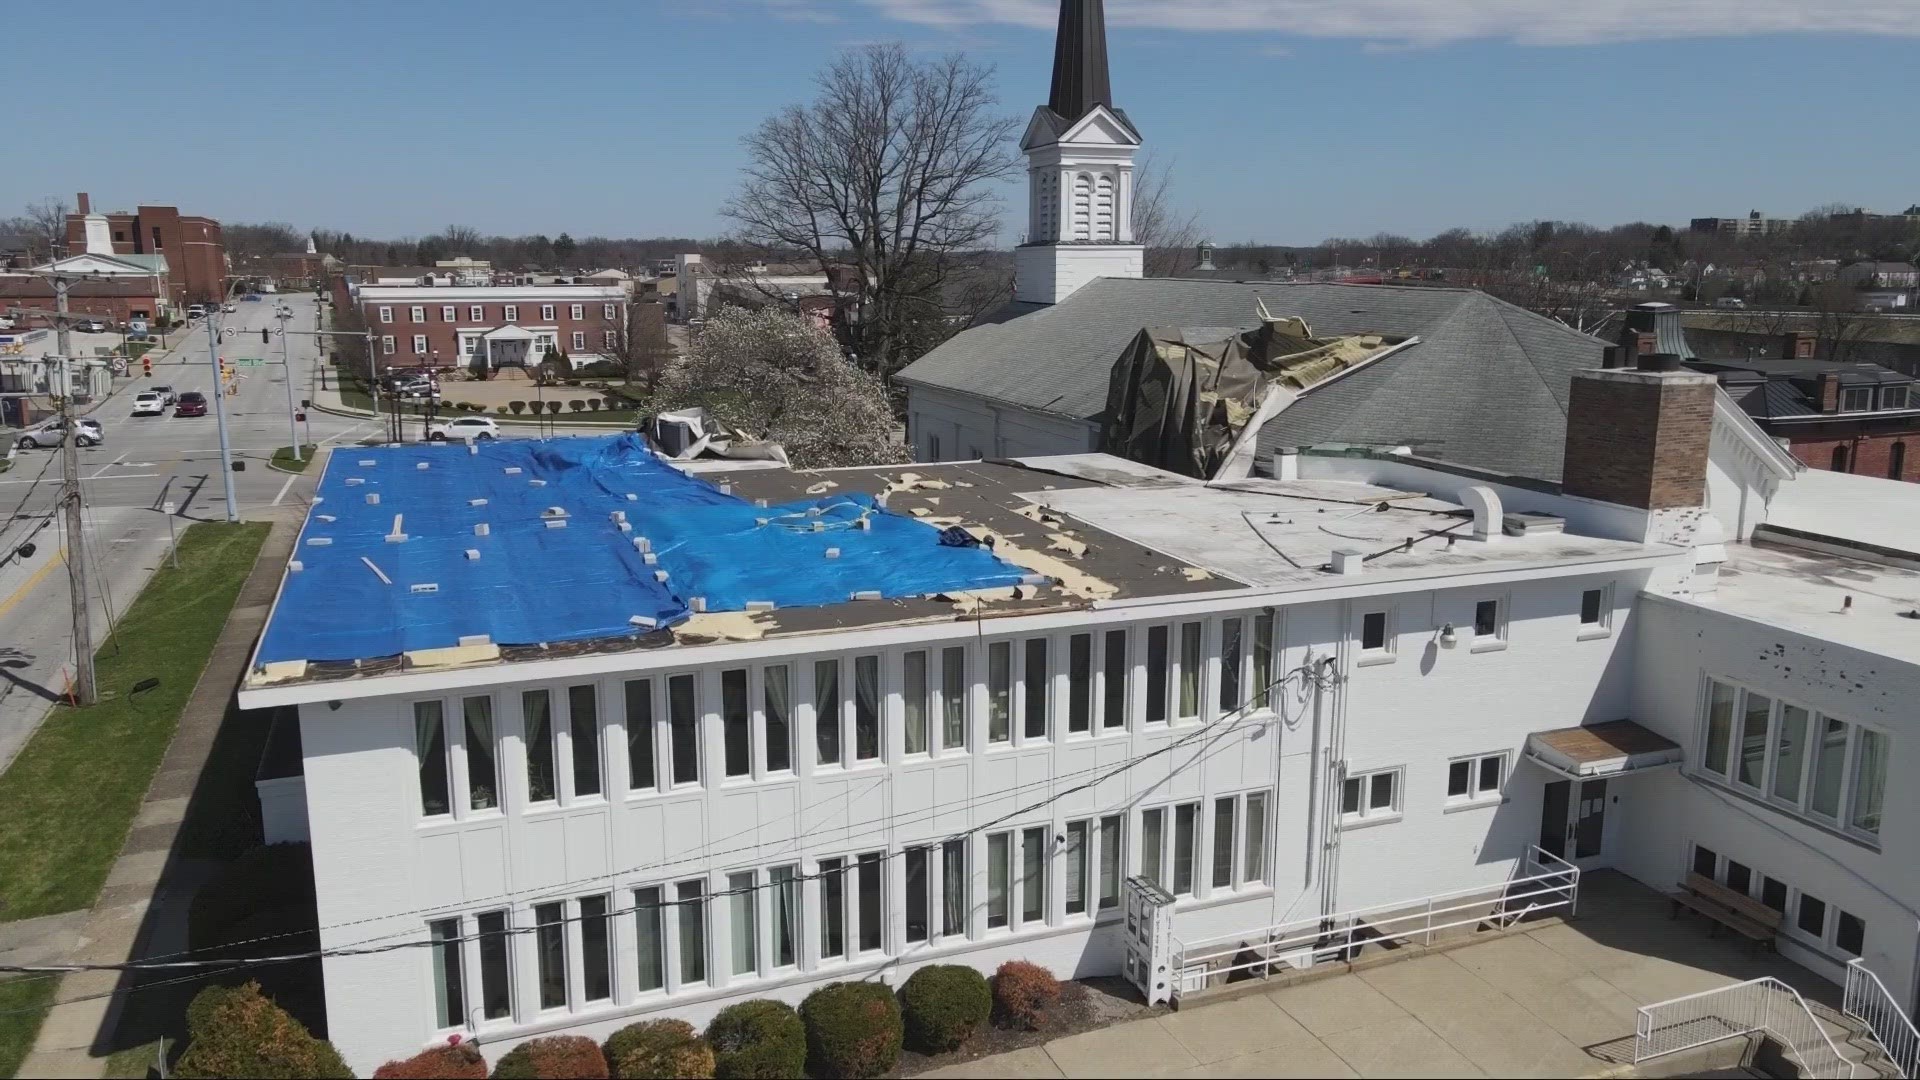 After a large portion of the church’s roof blew off on Saturday, they have been working to restore electricity and gas, and welcome the community back in.